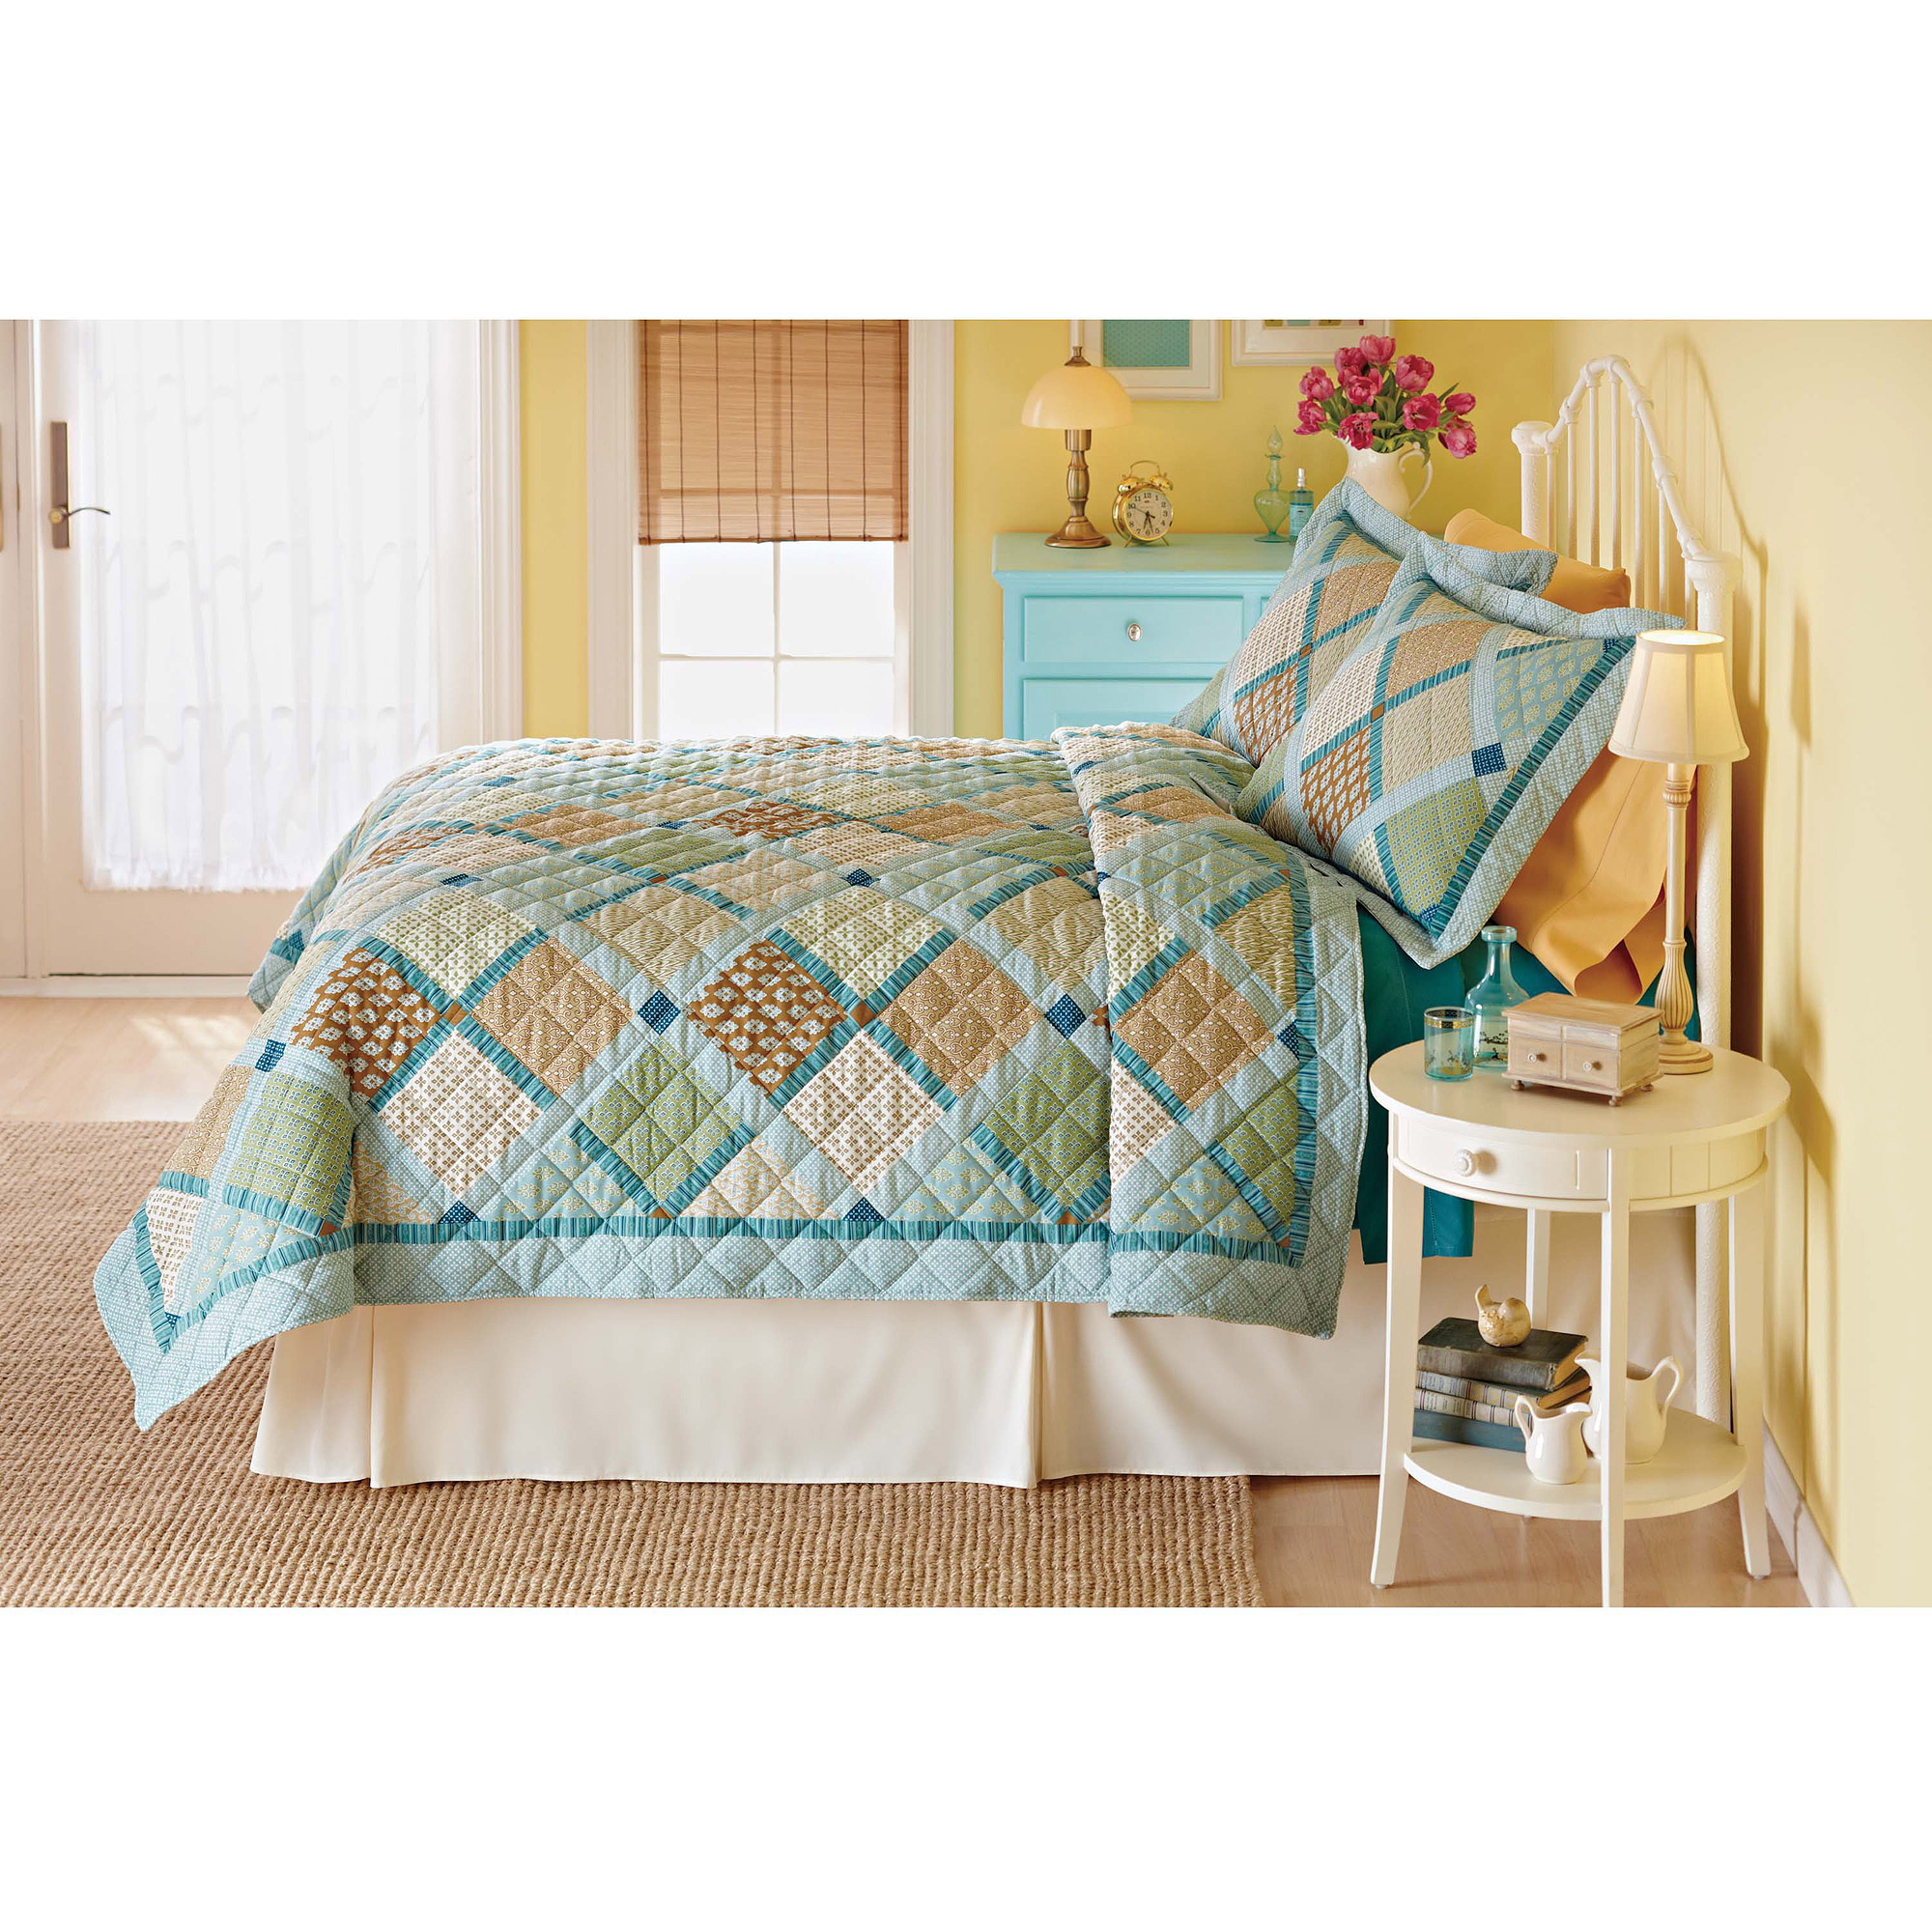 Mainstays Diagonal Plaid Quilt Twin - image 1 of 1